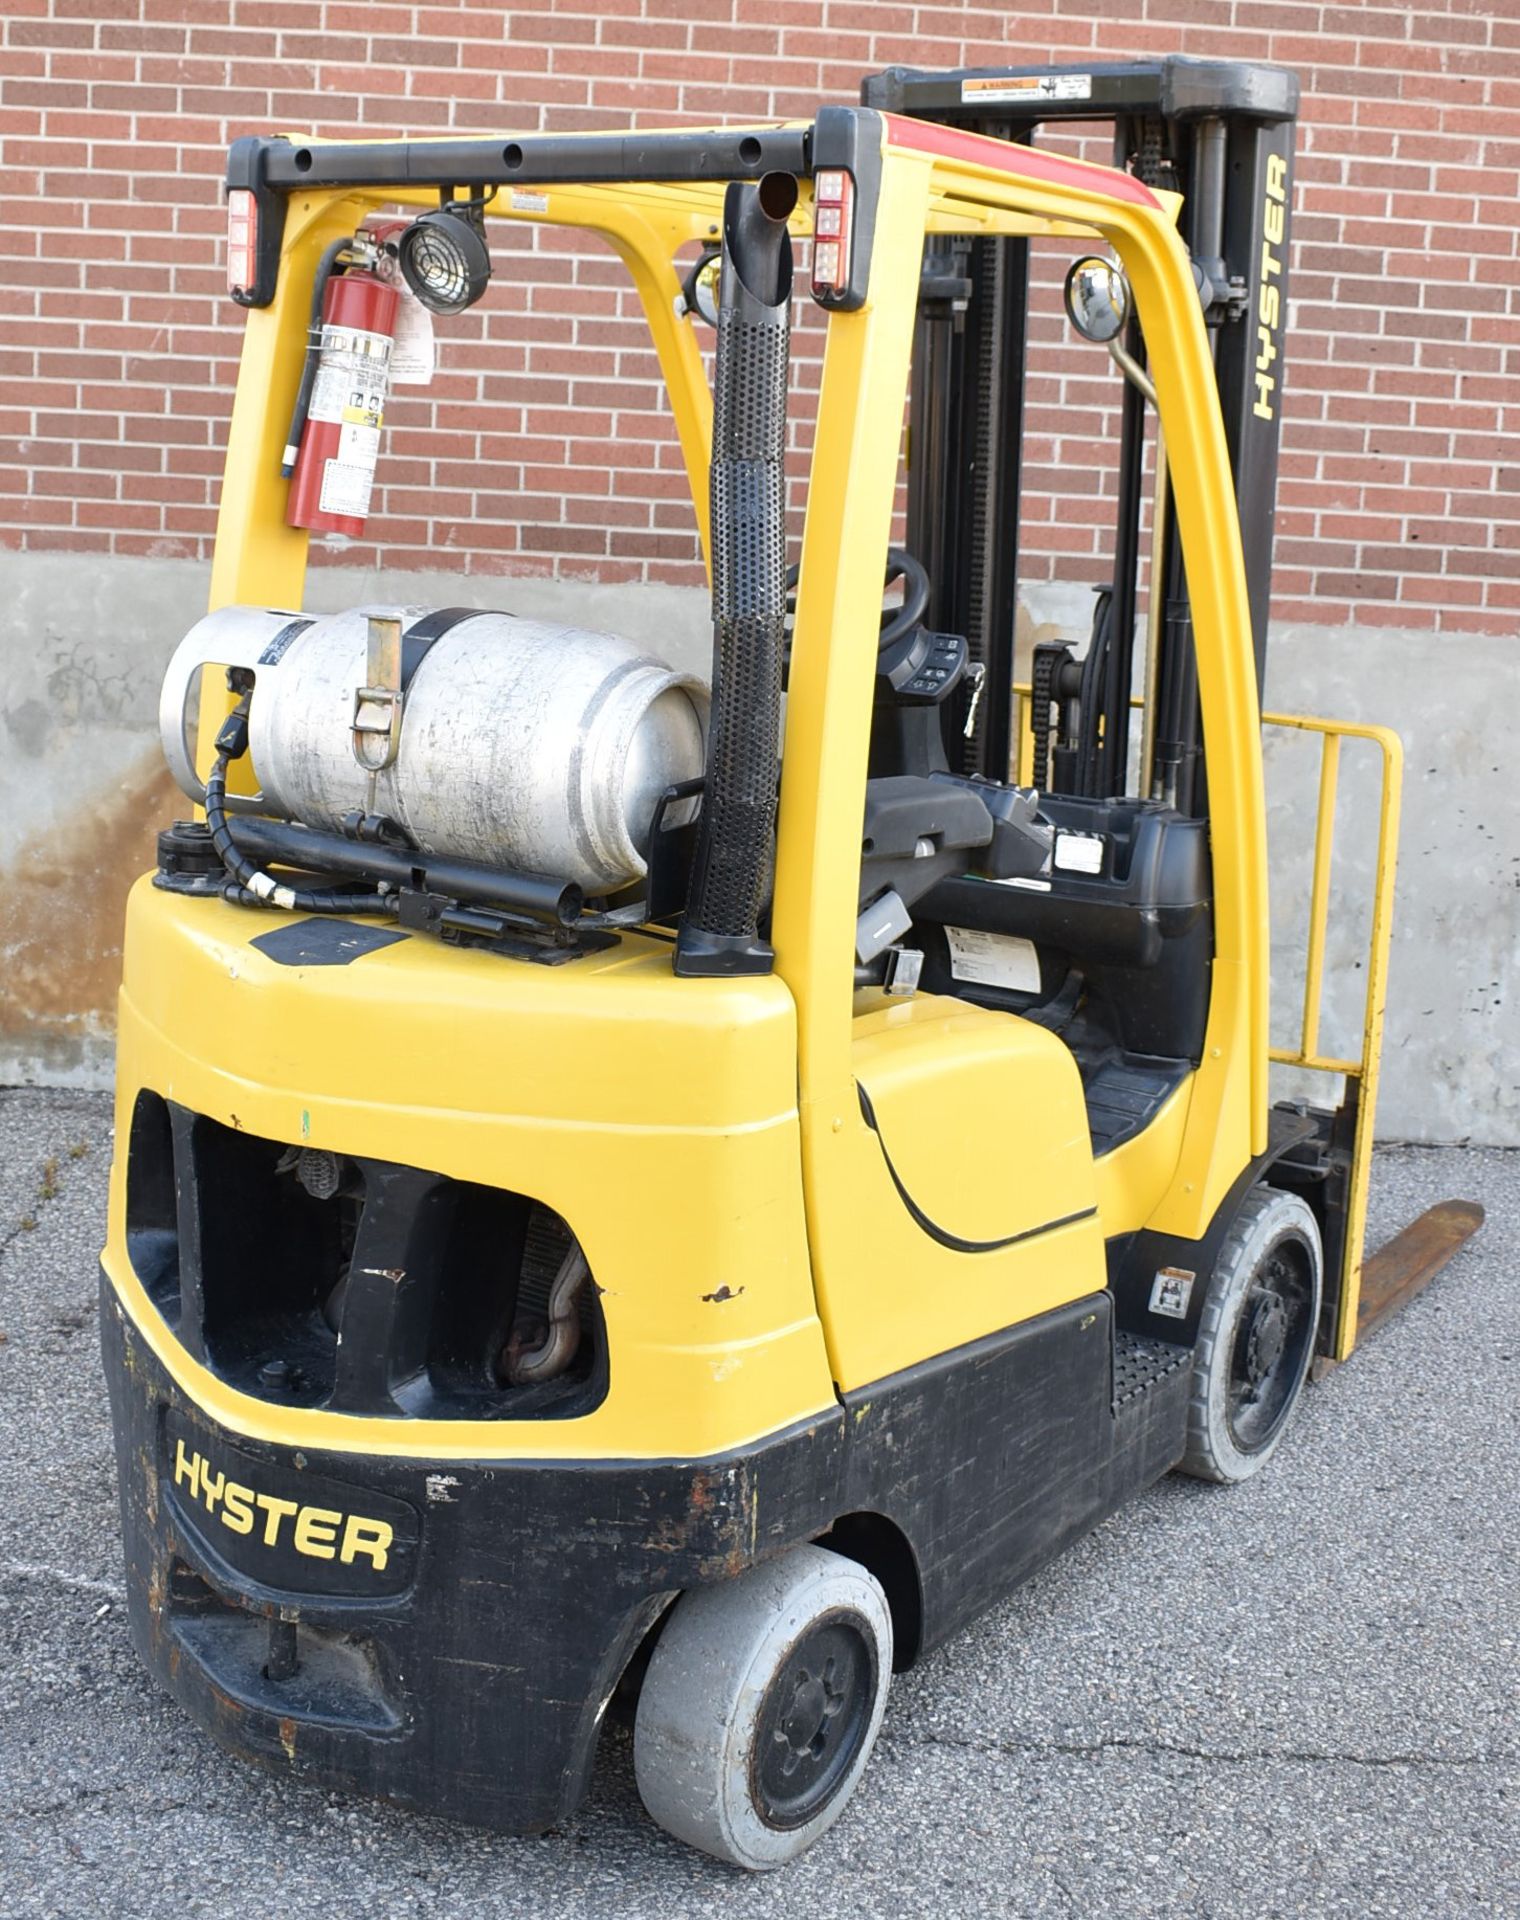 HYSTER S50FT 4,200 LB CAPACITY LPG FORKLIFT WITH 218.5" MAXIMUM LIFT HEIGHT, 3-STAGE MAST, SIDE - Image 4 of 10